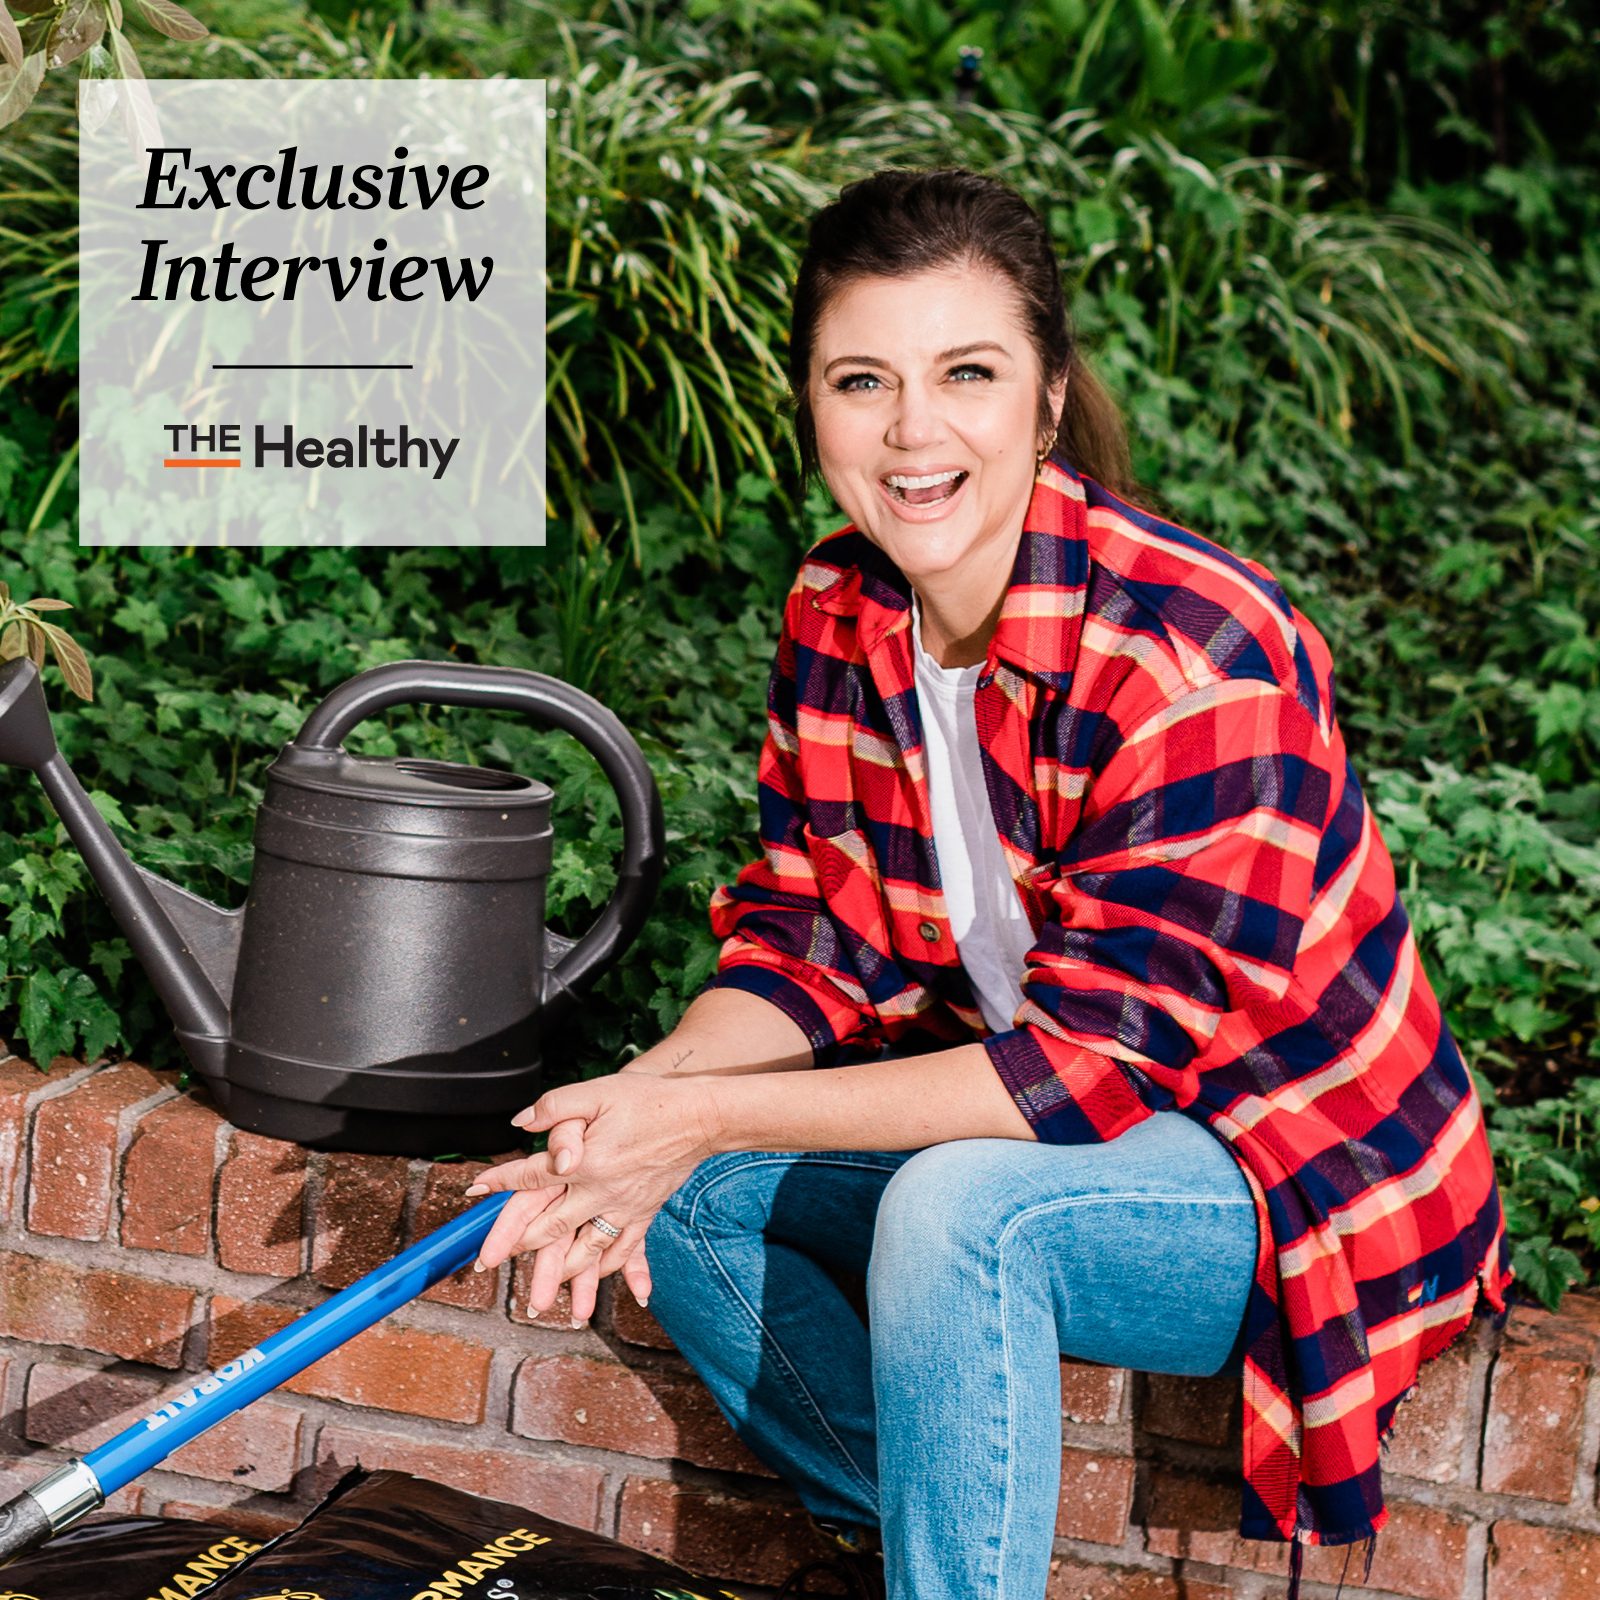 Tiffani Thiessen: This Earthy Hobby "Brings Me Back to My Roots"